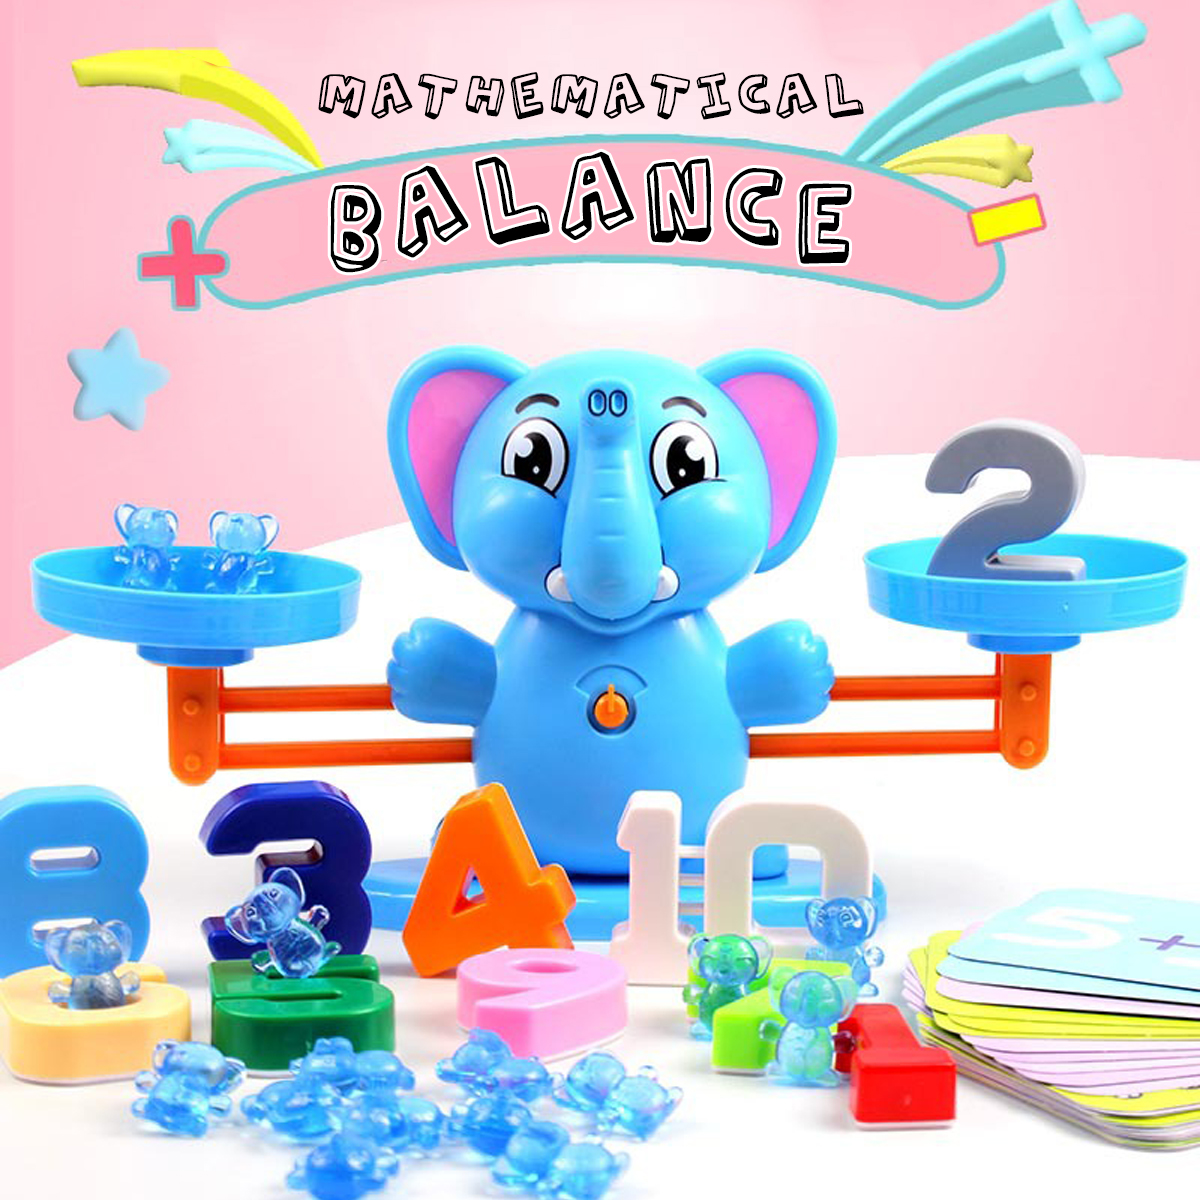 Math-Maths-Balance-Kid-Children-Toys-Educational-Counting-Learning-Game-Gift-1581032-1